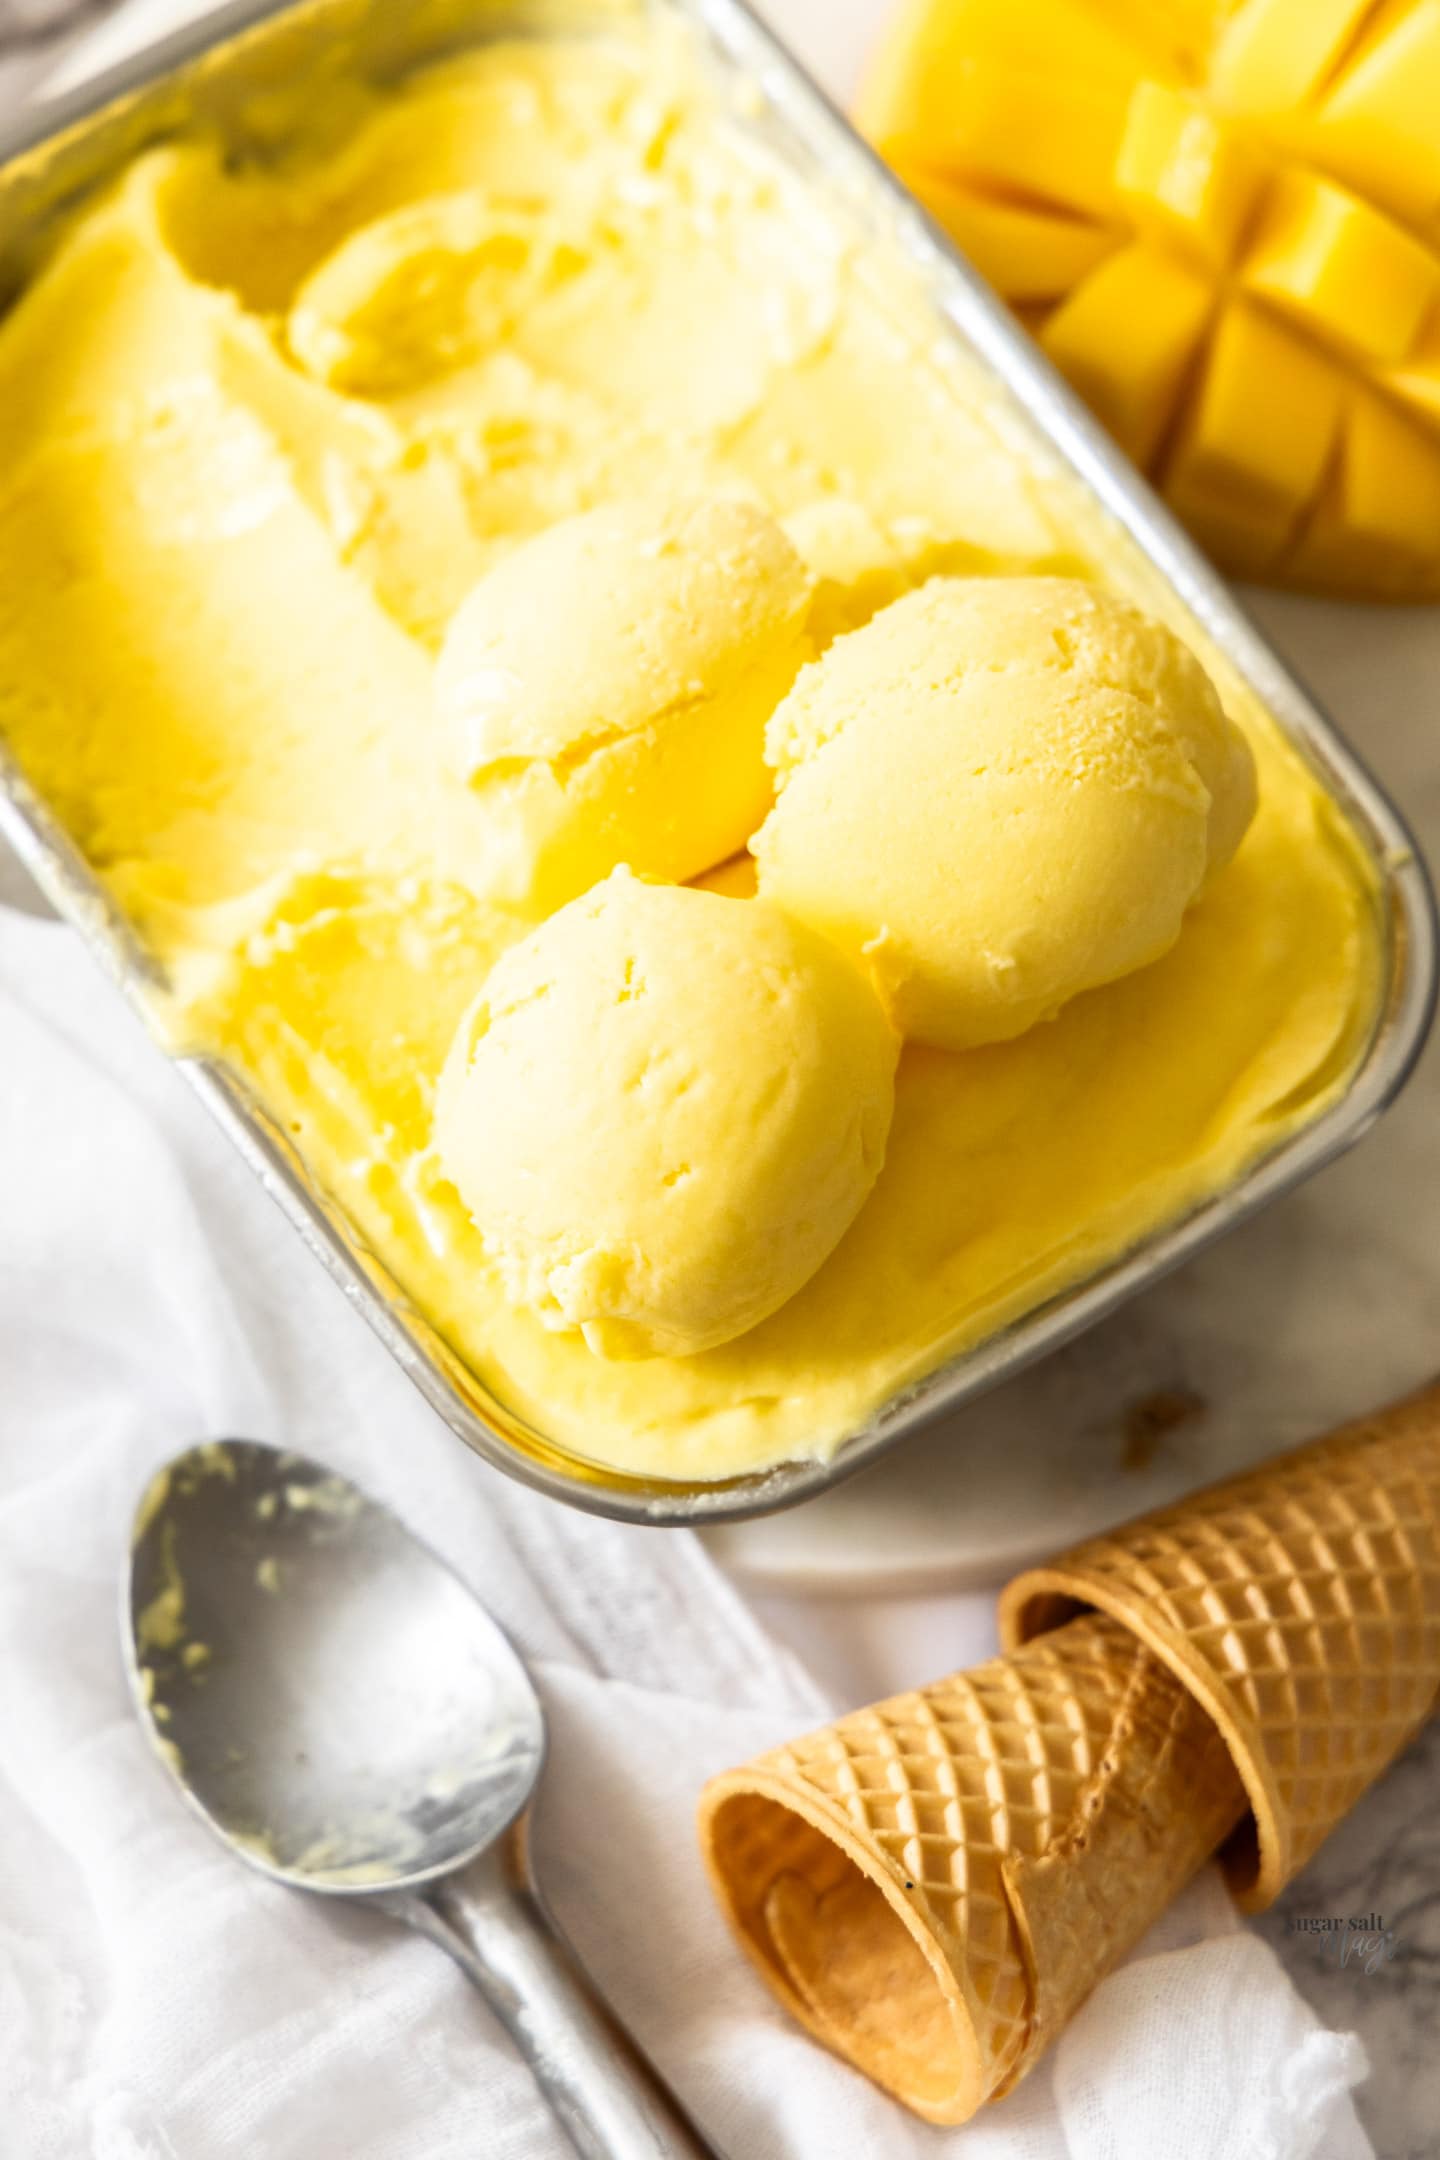 Scoops of mango gelato on top of the pan full of it.